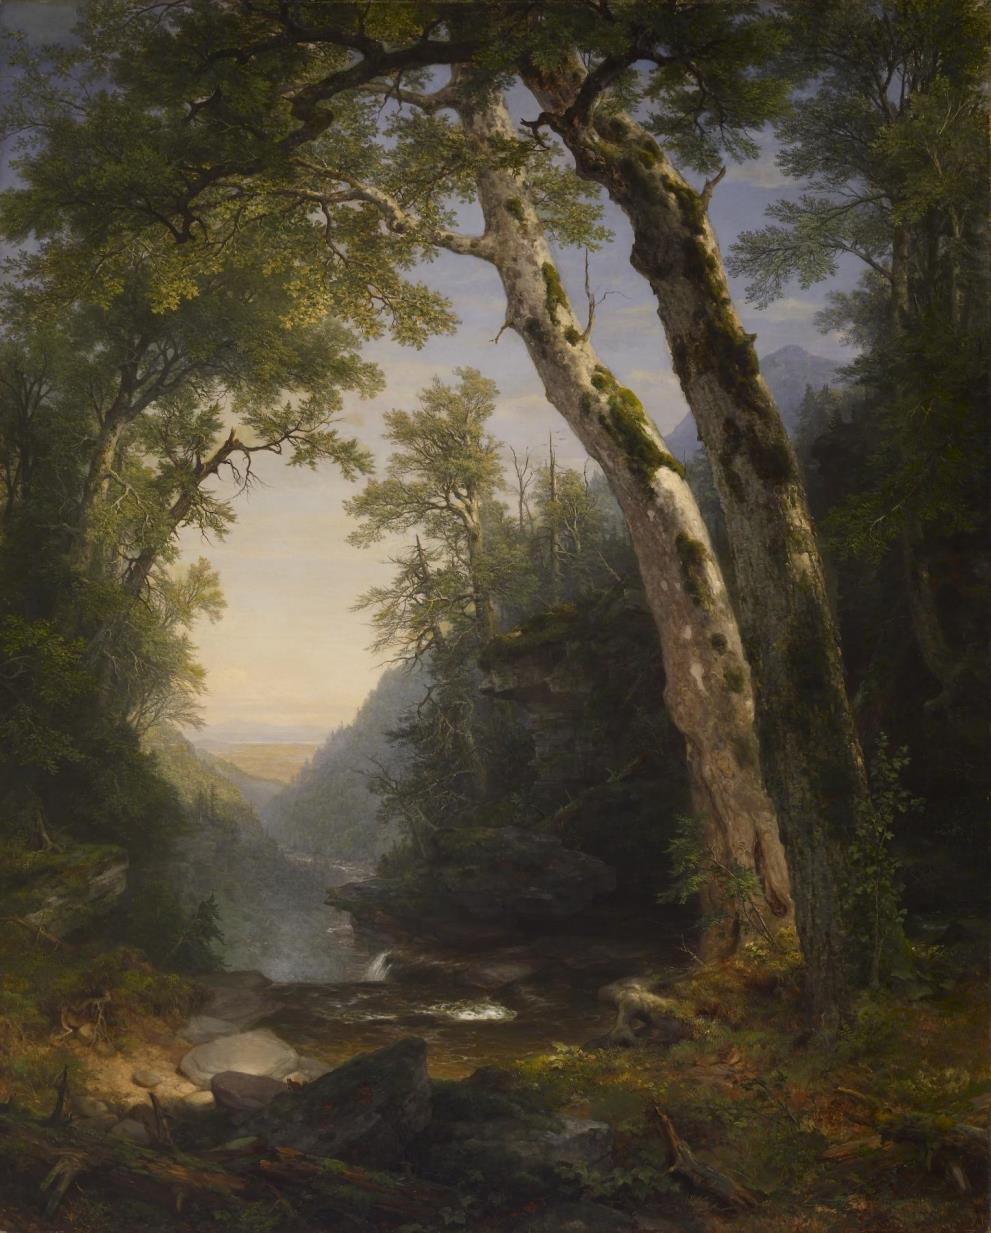 The Catskills, 1859 by Asher Durand "Asher Durand believed that the landscape was such an integral part of American identity that he proclaimed that every American family